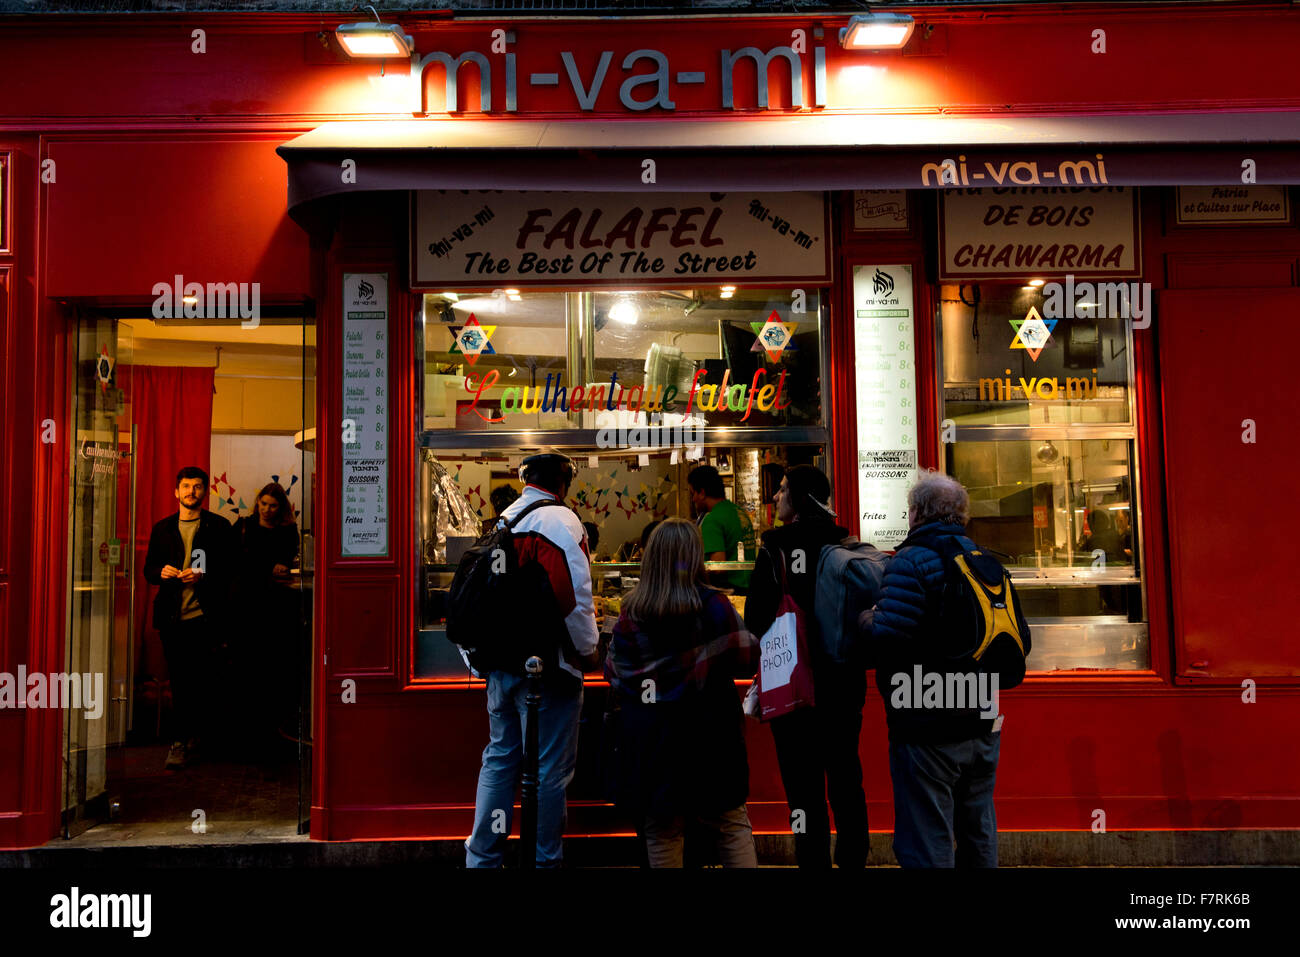 A falafel restaurant in Rue des Rossiers in the Marais district of Paris, France Stock Photo